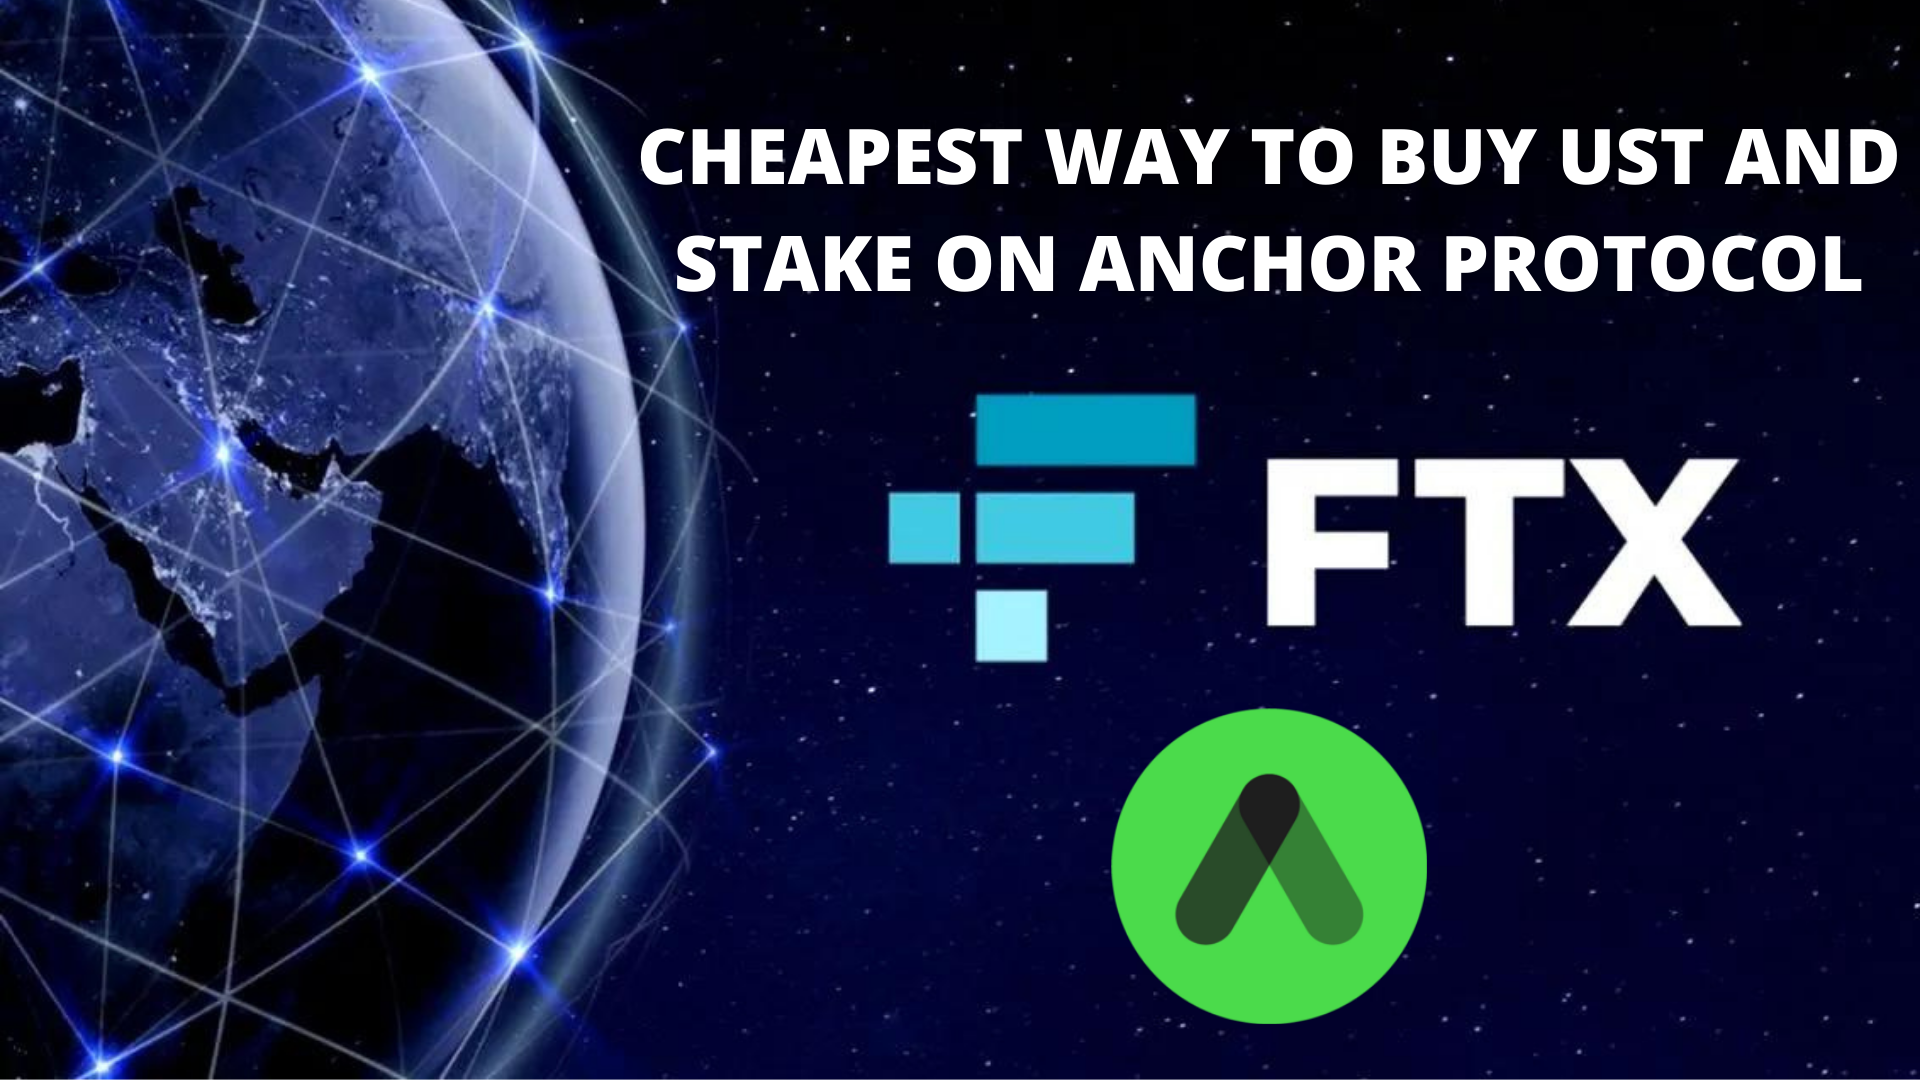 CHEAPEST WAY TO BUY UST AND STAKE ON ANCHOR PROTOCOL